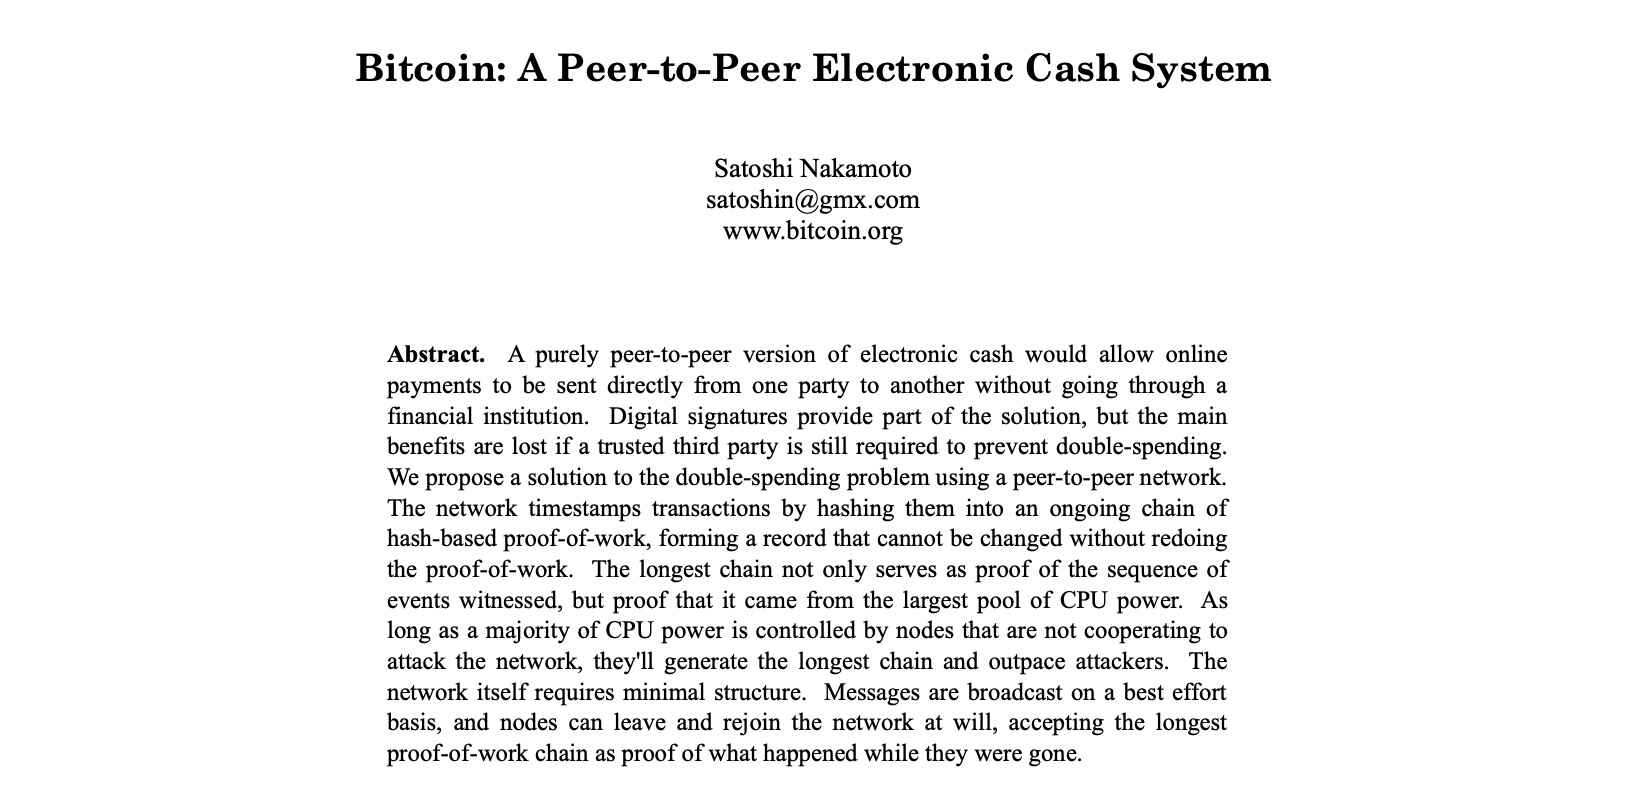 Bitcoin Whitepaper Abstract